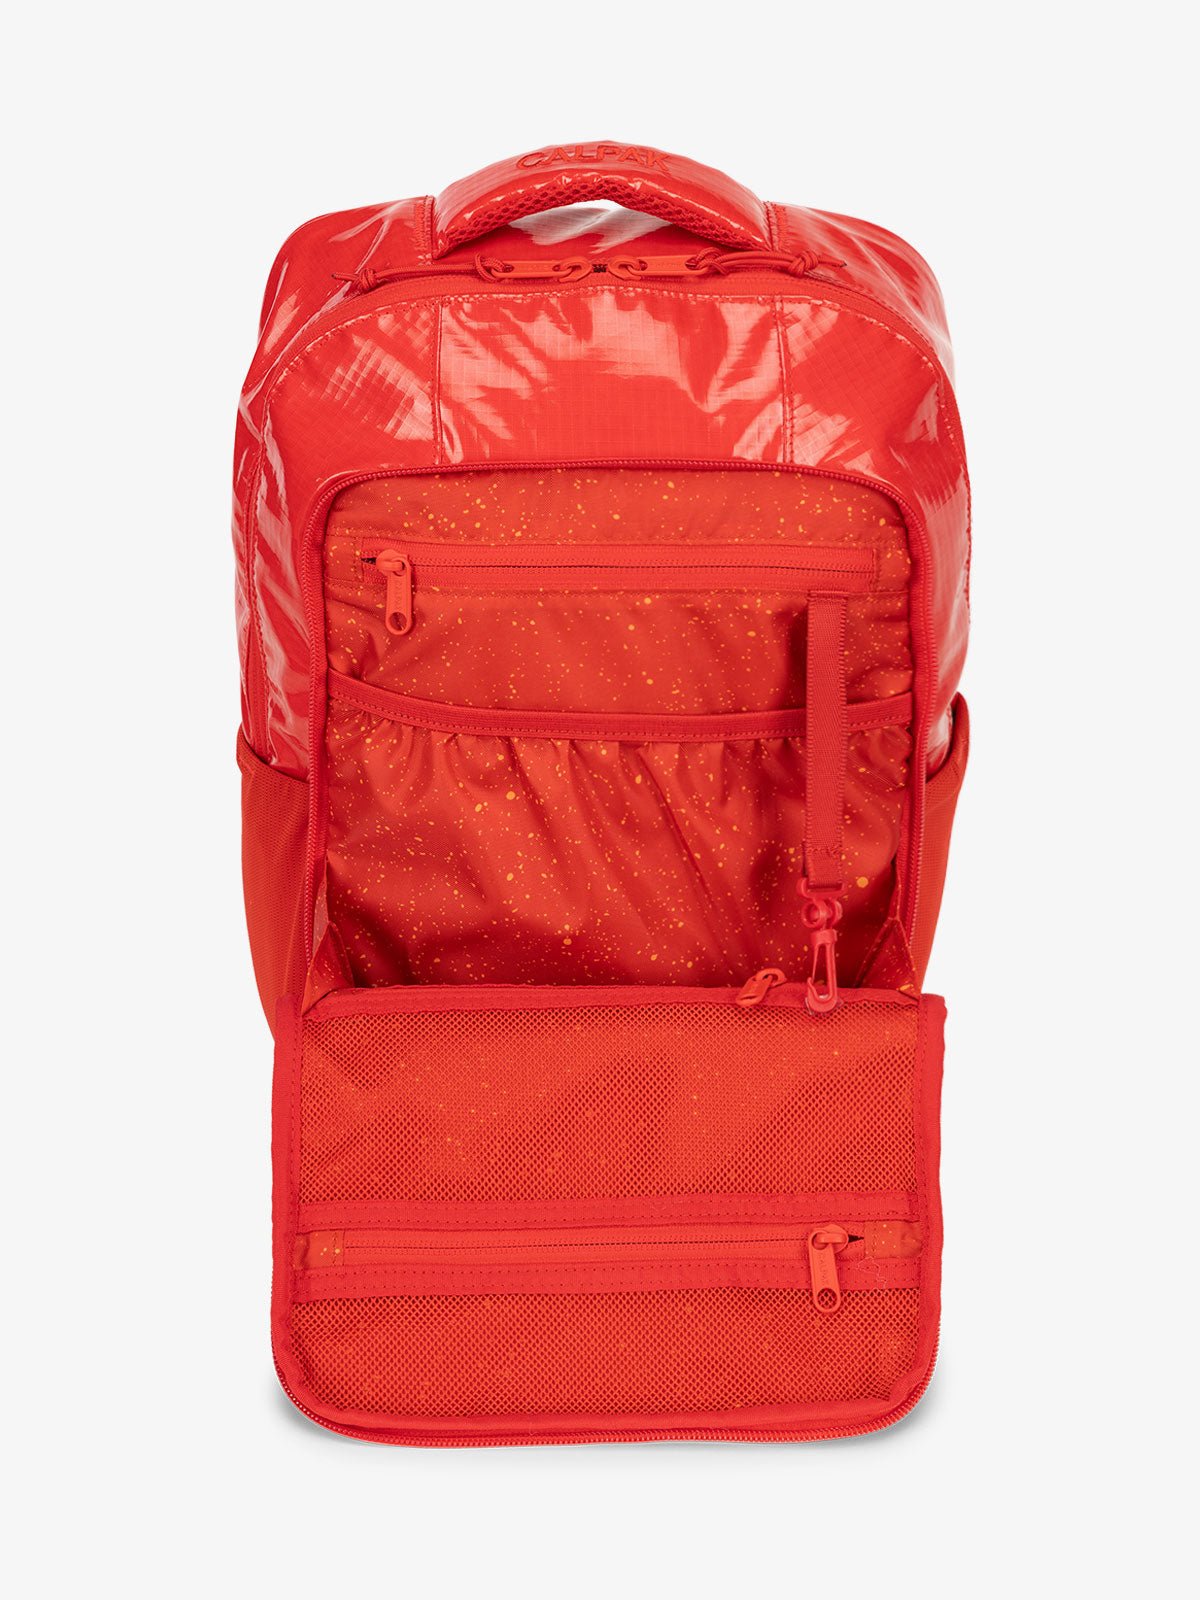 Front organizational panel of CALPAK Terra Hydration Backpack in red